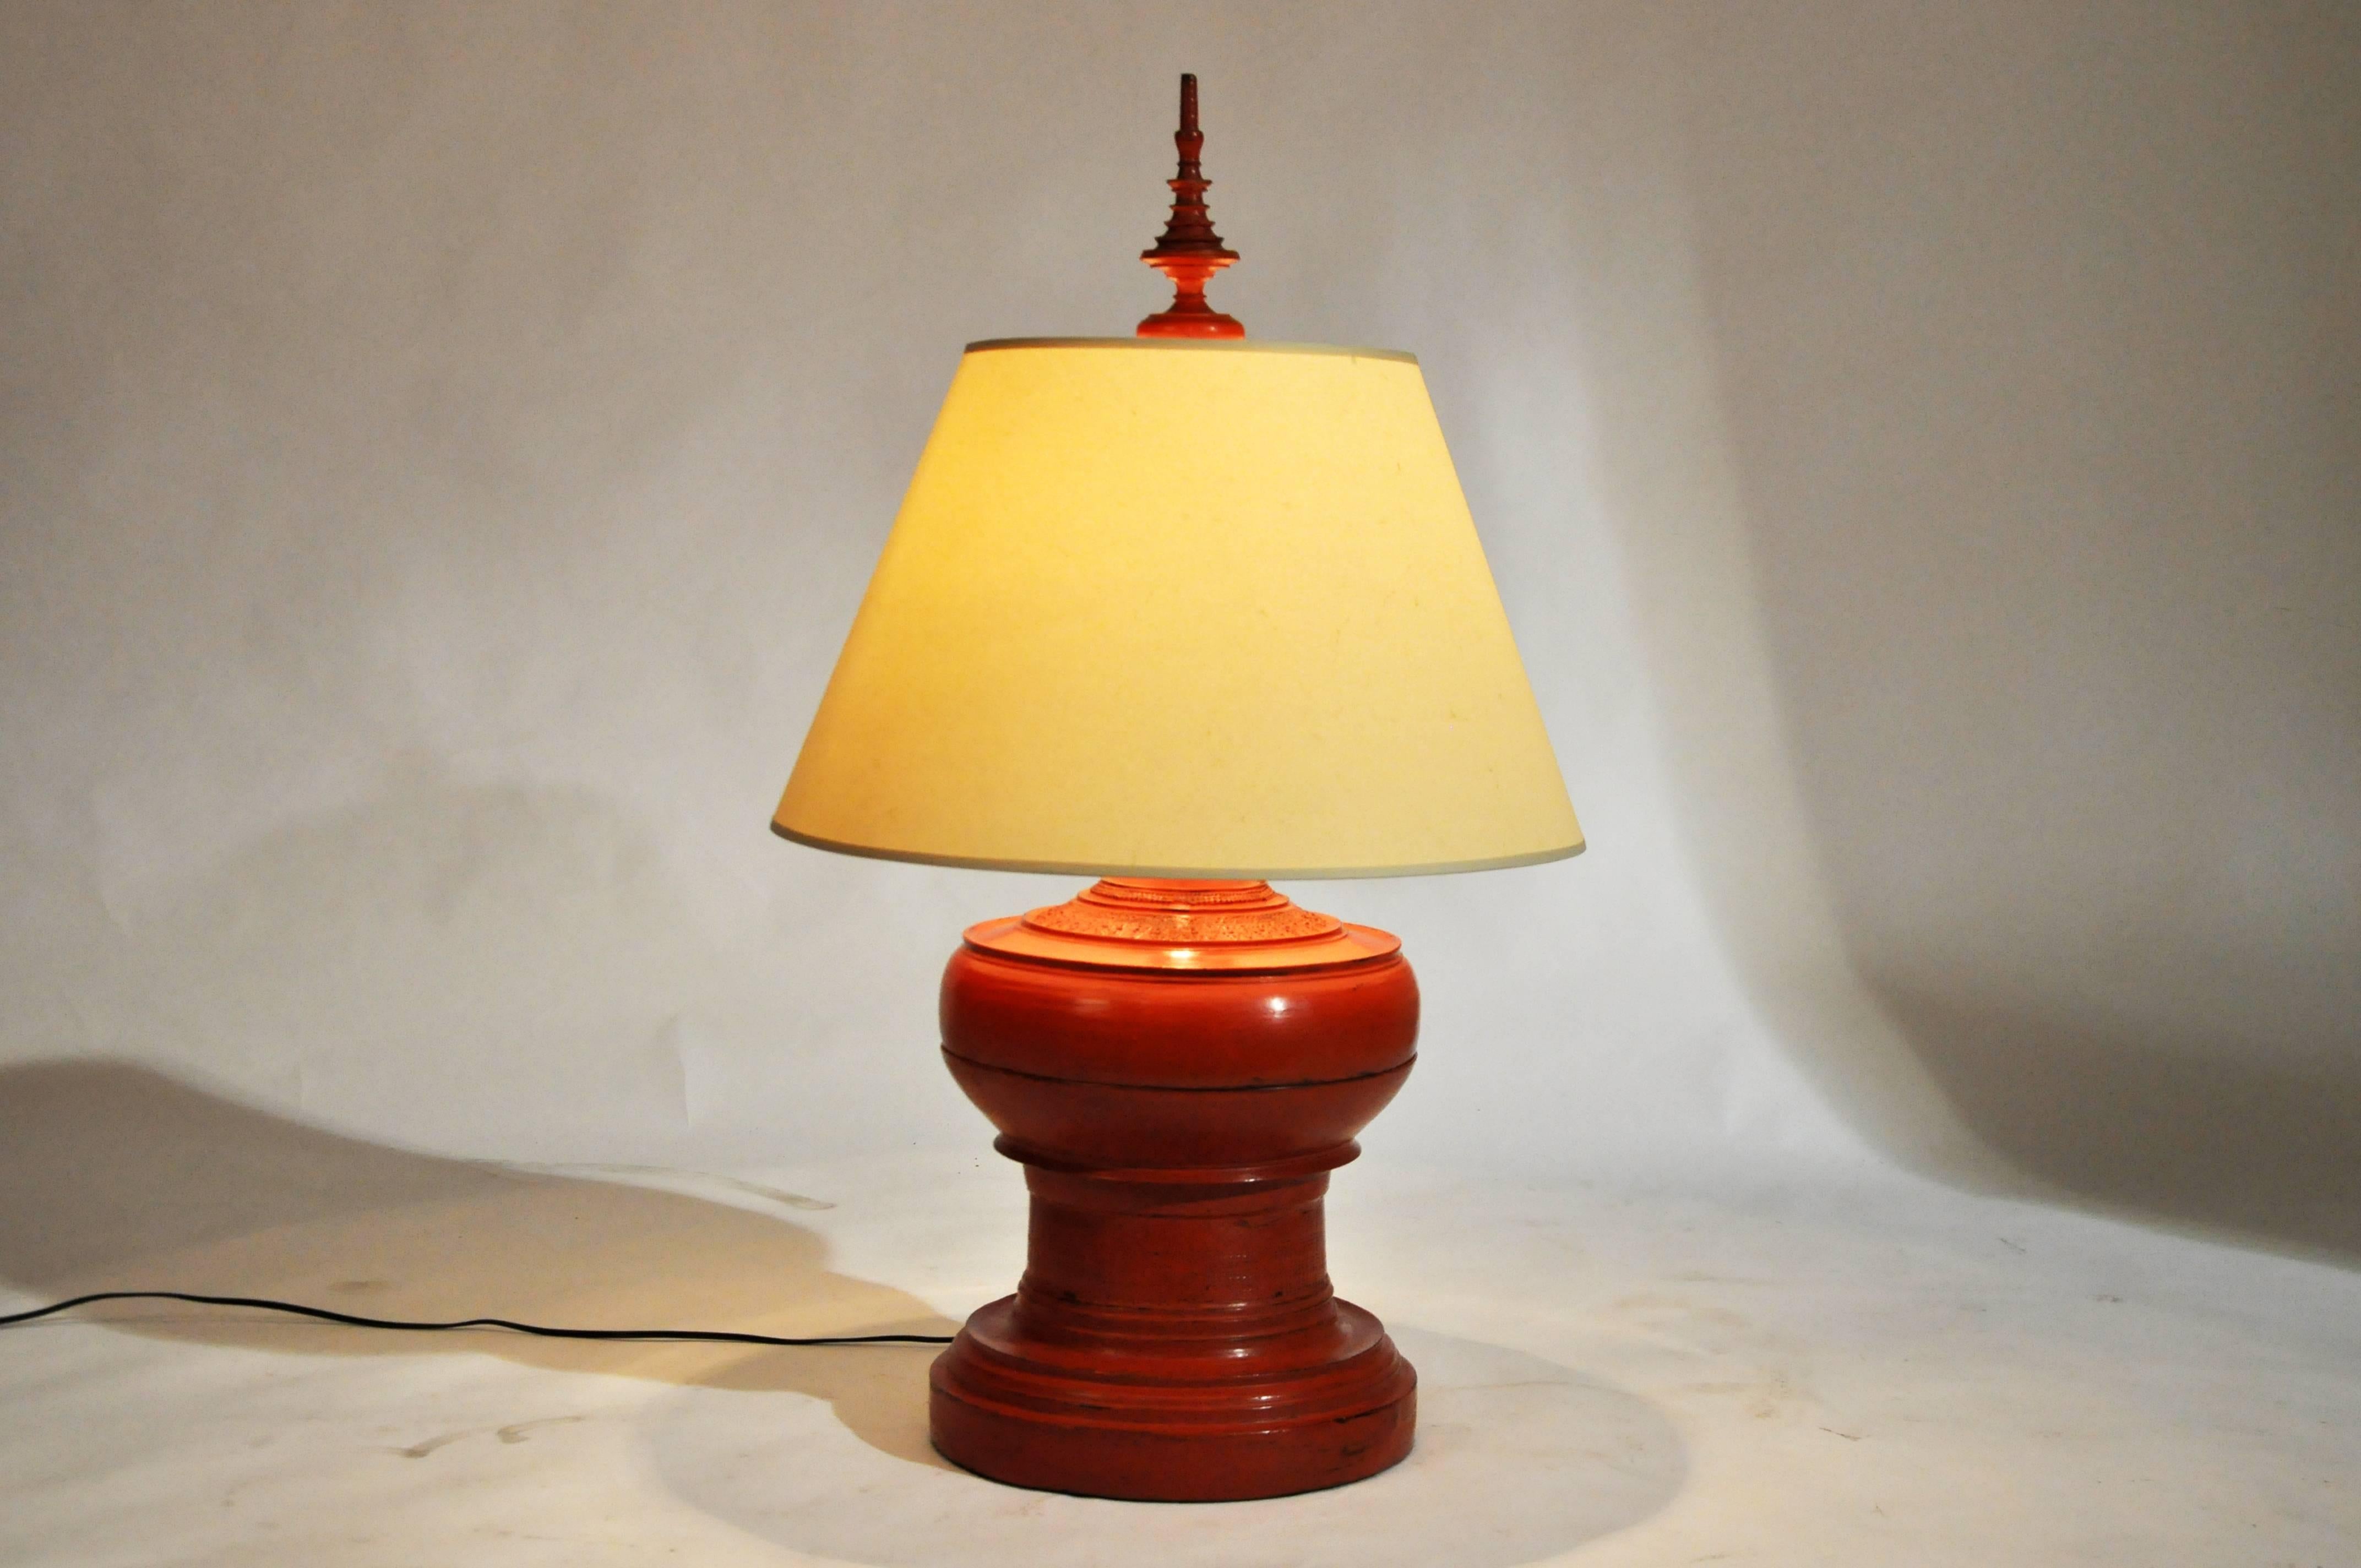 This Thai temple offering urn is from Thailand and was converted to a table lamp wired for use in the U.S. The lamp is made from red lacquer over teak.